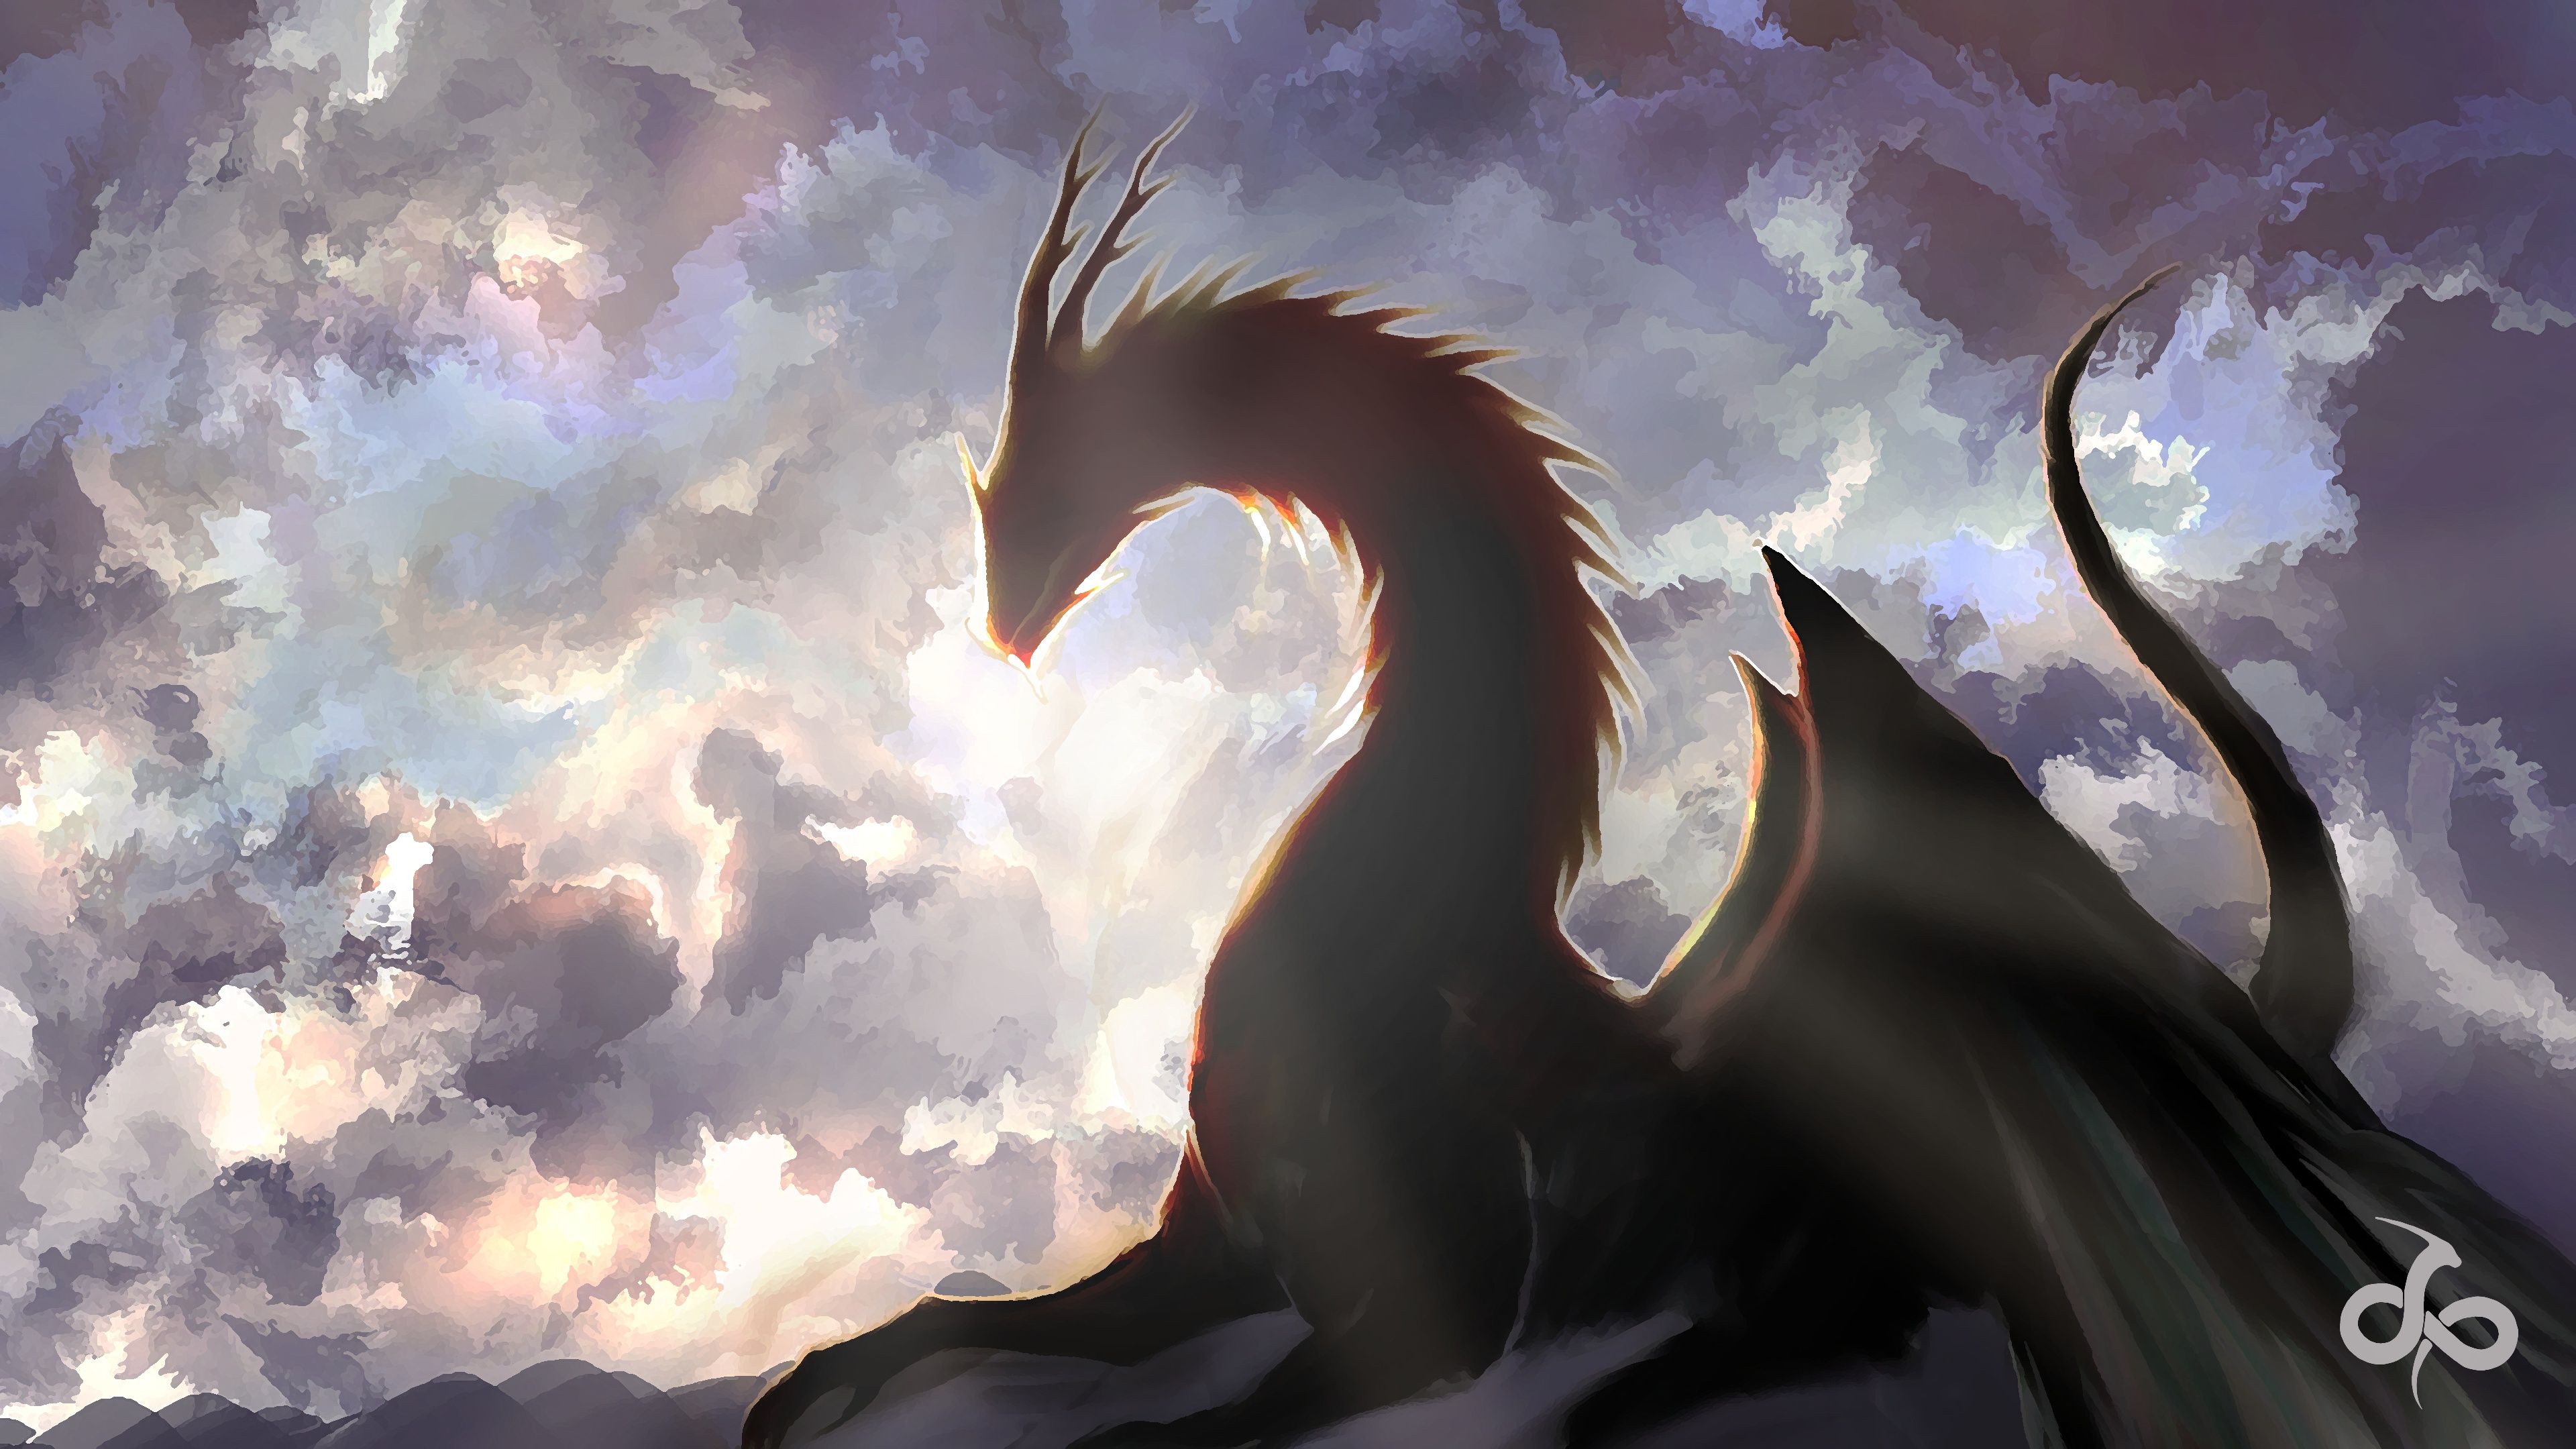 Japanese Dragon Aesthetic Wallpapers  Cool Dragon Wallpapers